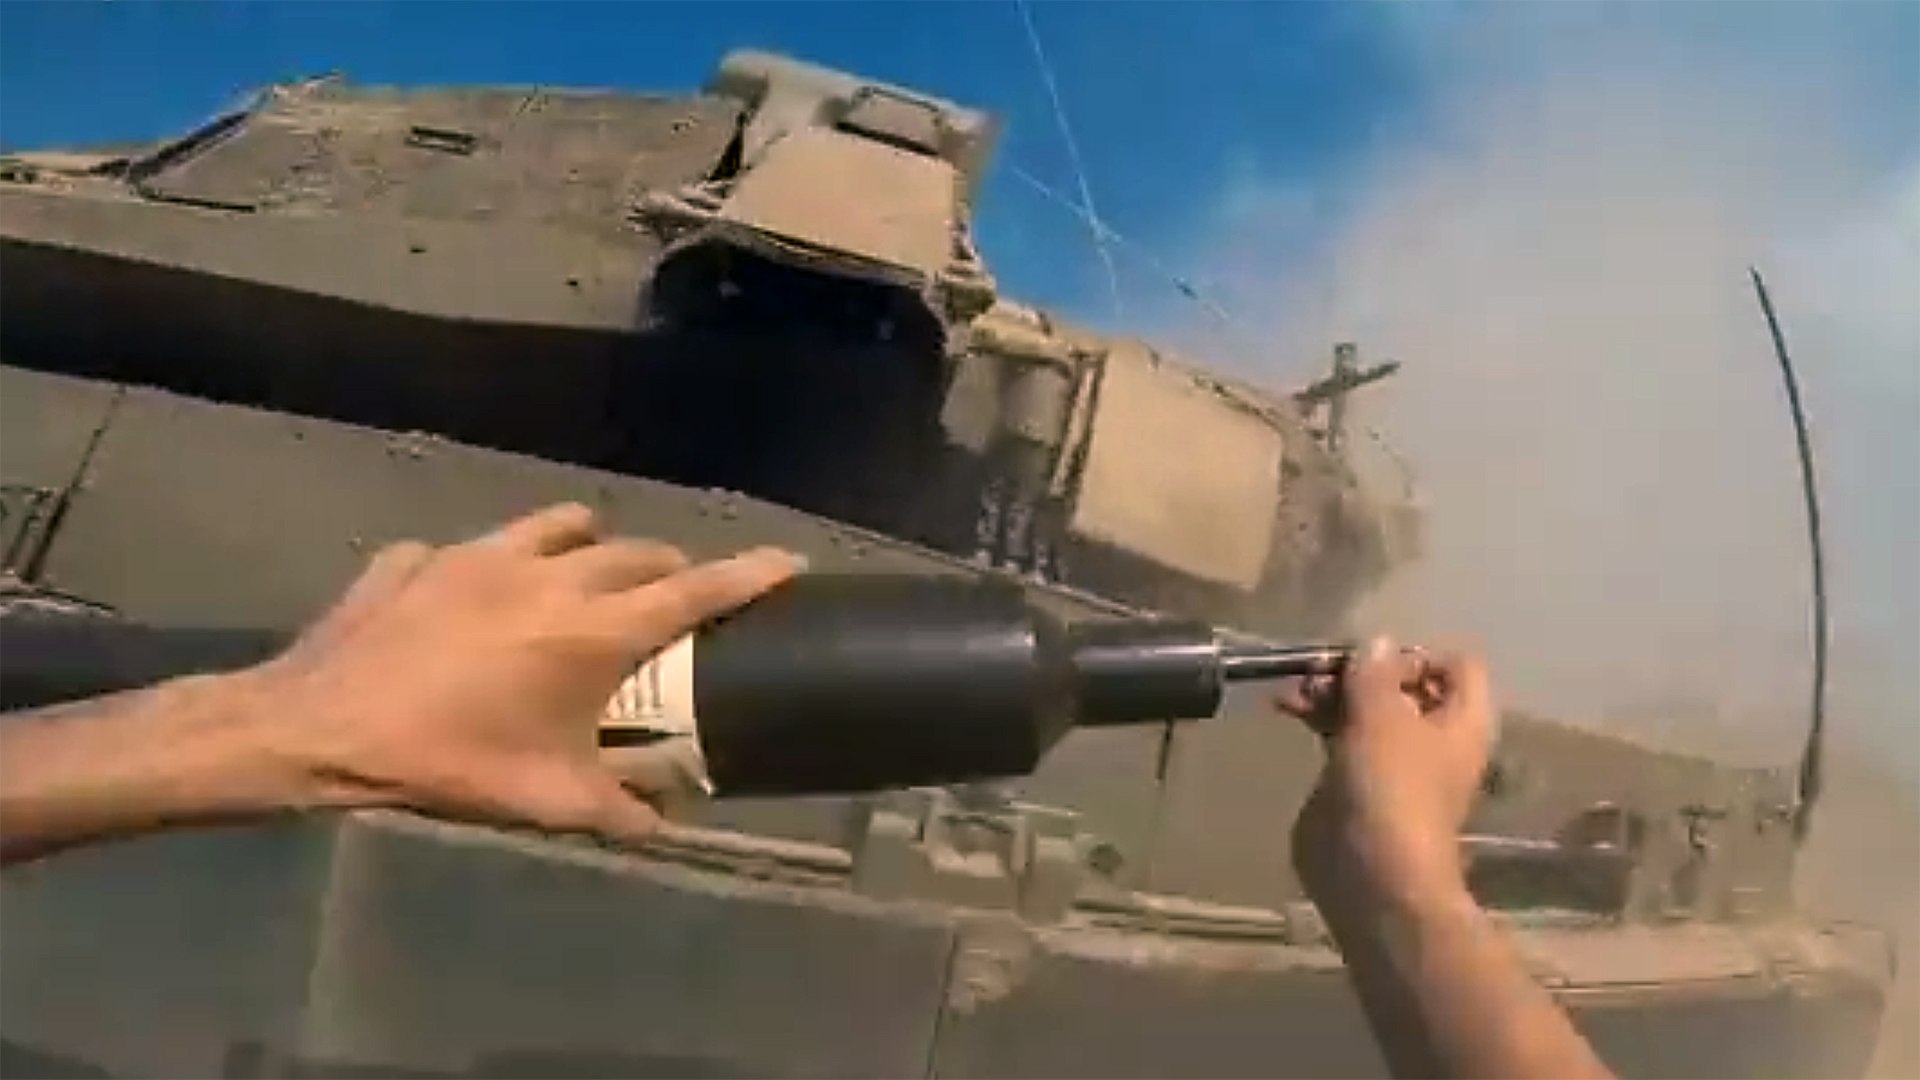 Wild new video shows a Hamas fighter run toward an Israeli tank and place an IED on it.